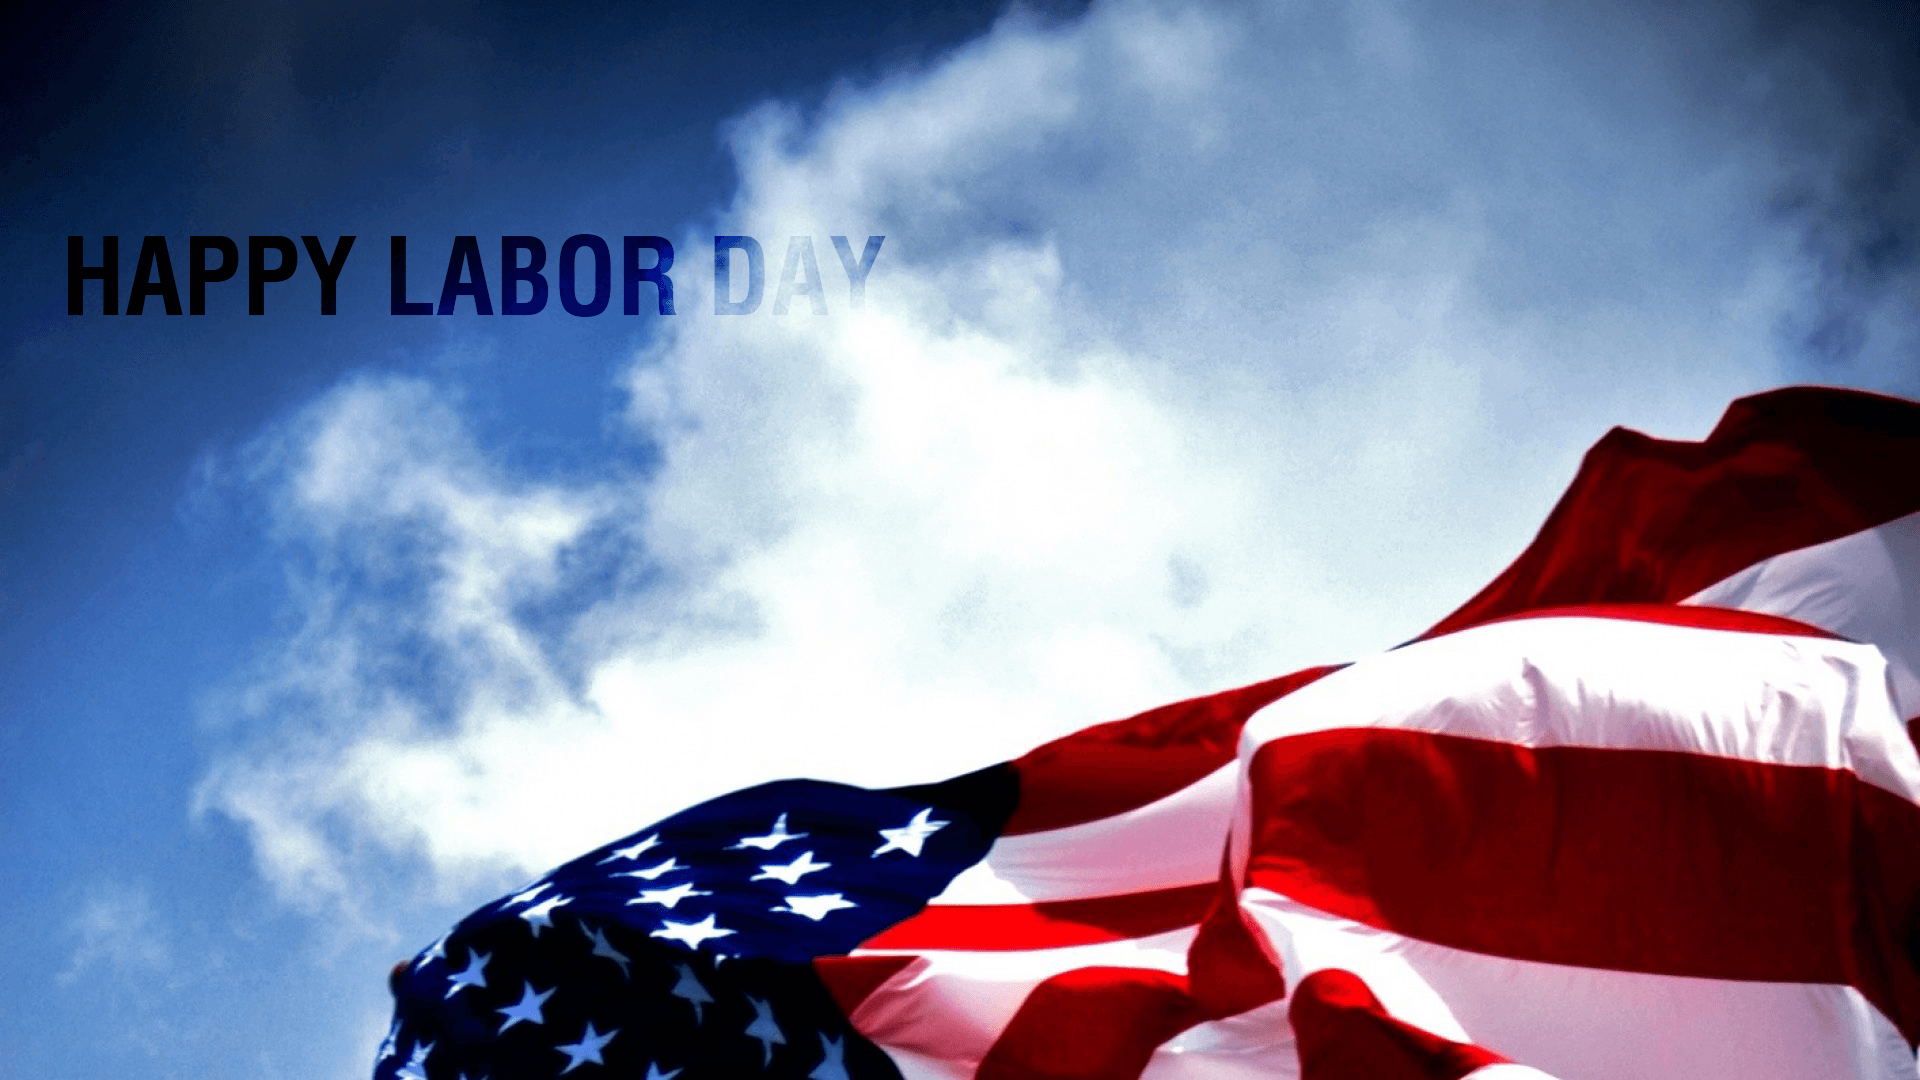 Happy Labor Day Wishes HD Wallpaper, Image, Photo & Picture Free